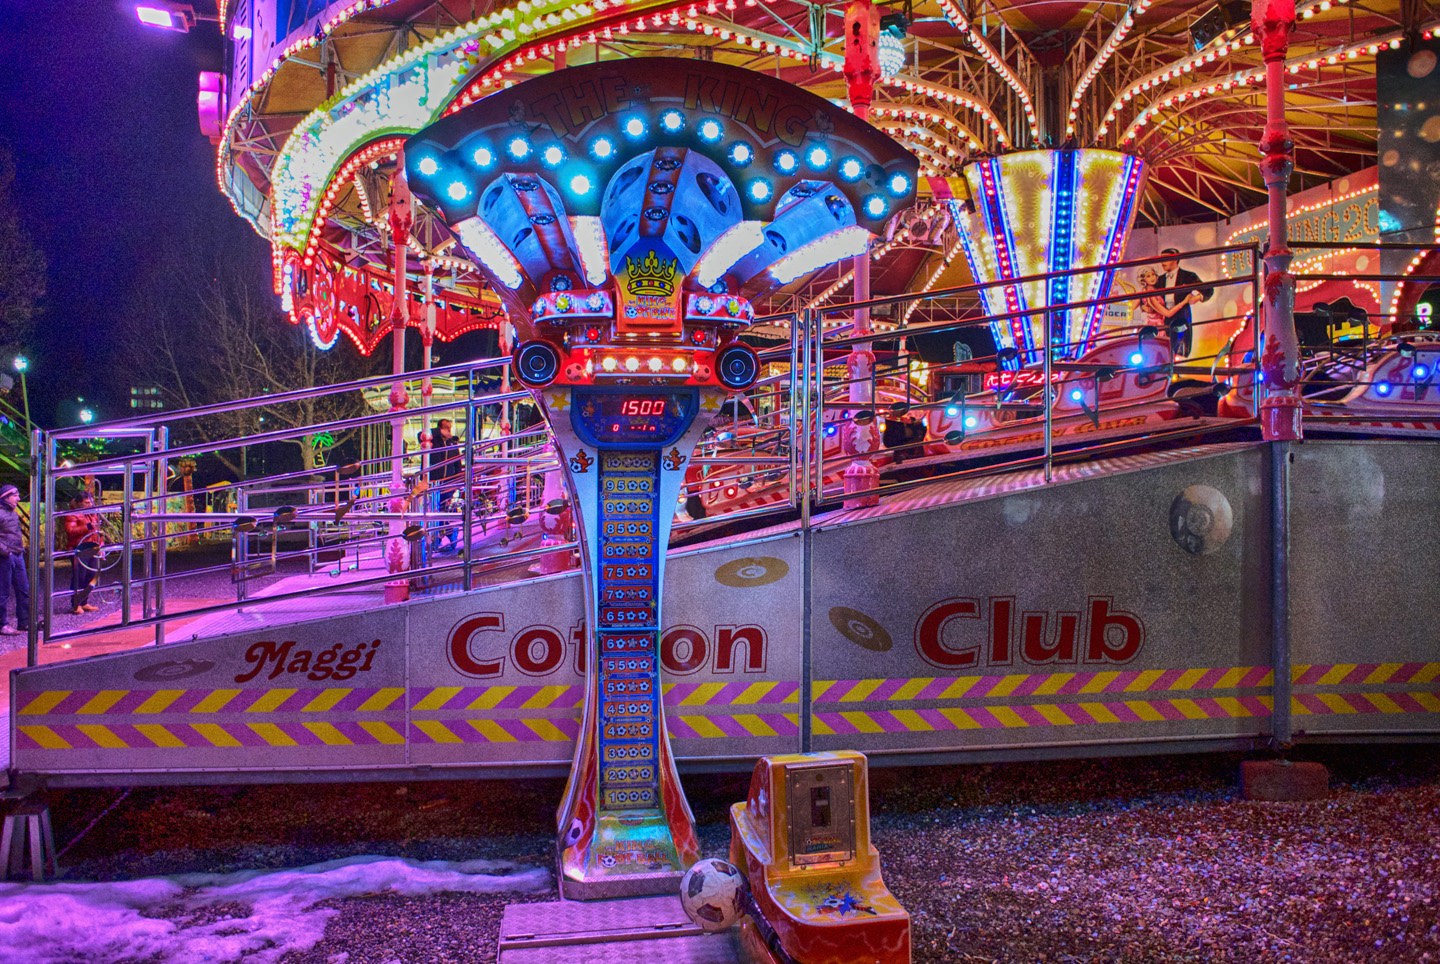 Memories within the empty Carnival